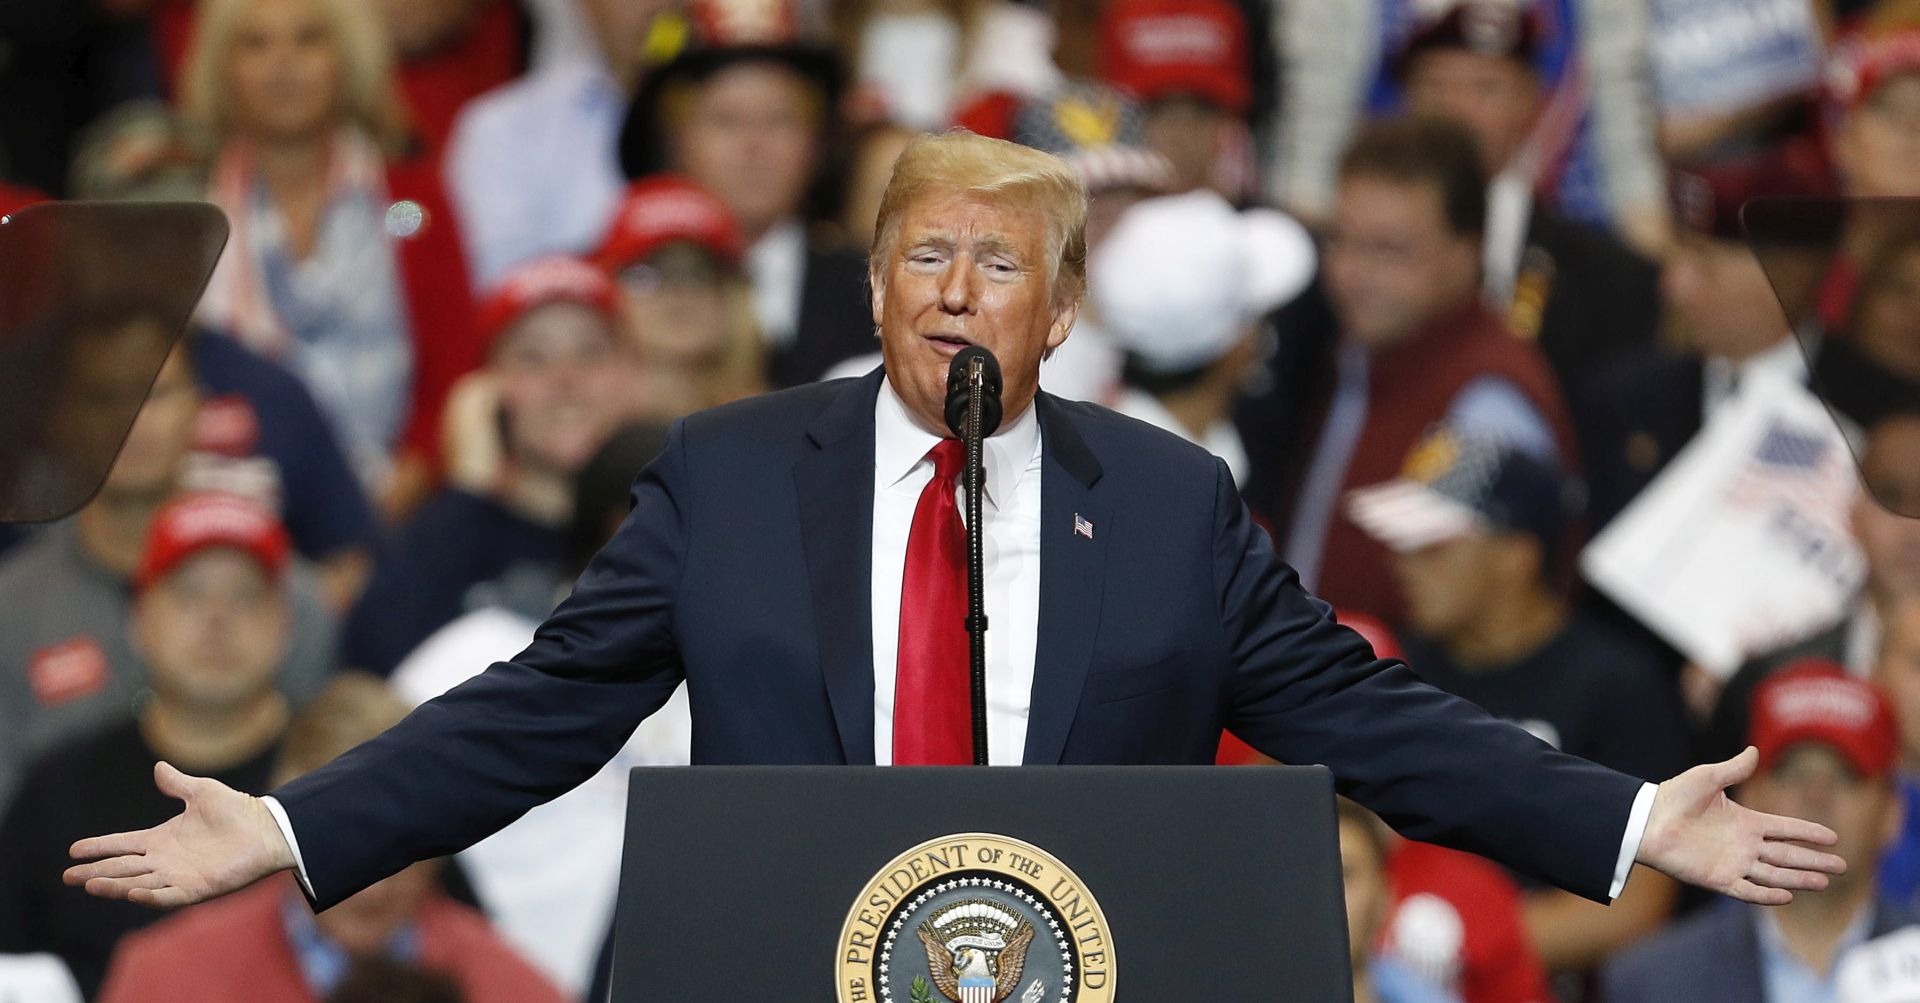 epa07143753 United States President Donald J. Trump speaks to supporters during a rally at the I-X Center in Cleveland, Ohio, USA, 05 November, 2018. US voters go to the polls on 06 November to vote for all 435 members of the House of Representatives, 35 seats in the 100-member Senate and for 36 out of 50 state governors who are up for re-election.  EPA/DAVID MAXWELL